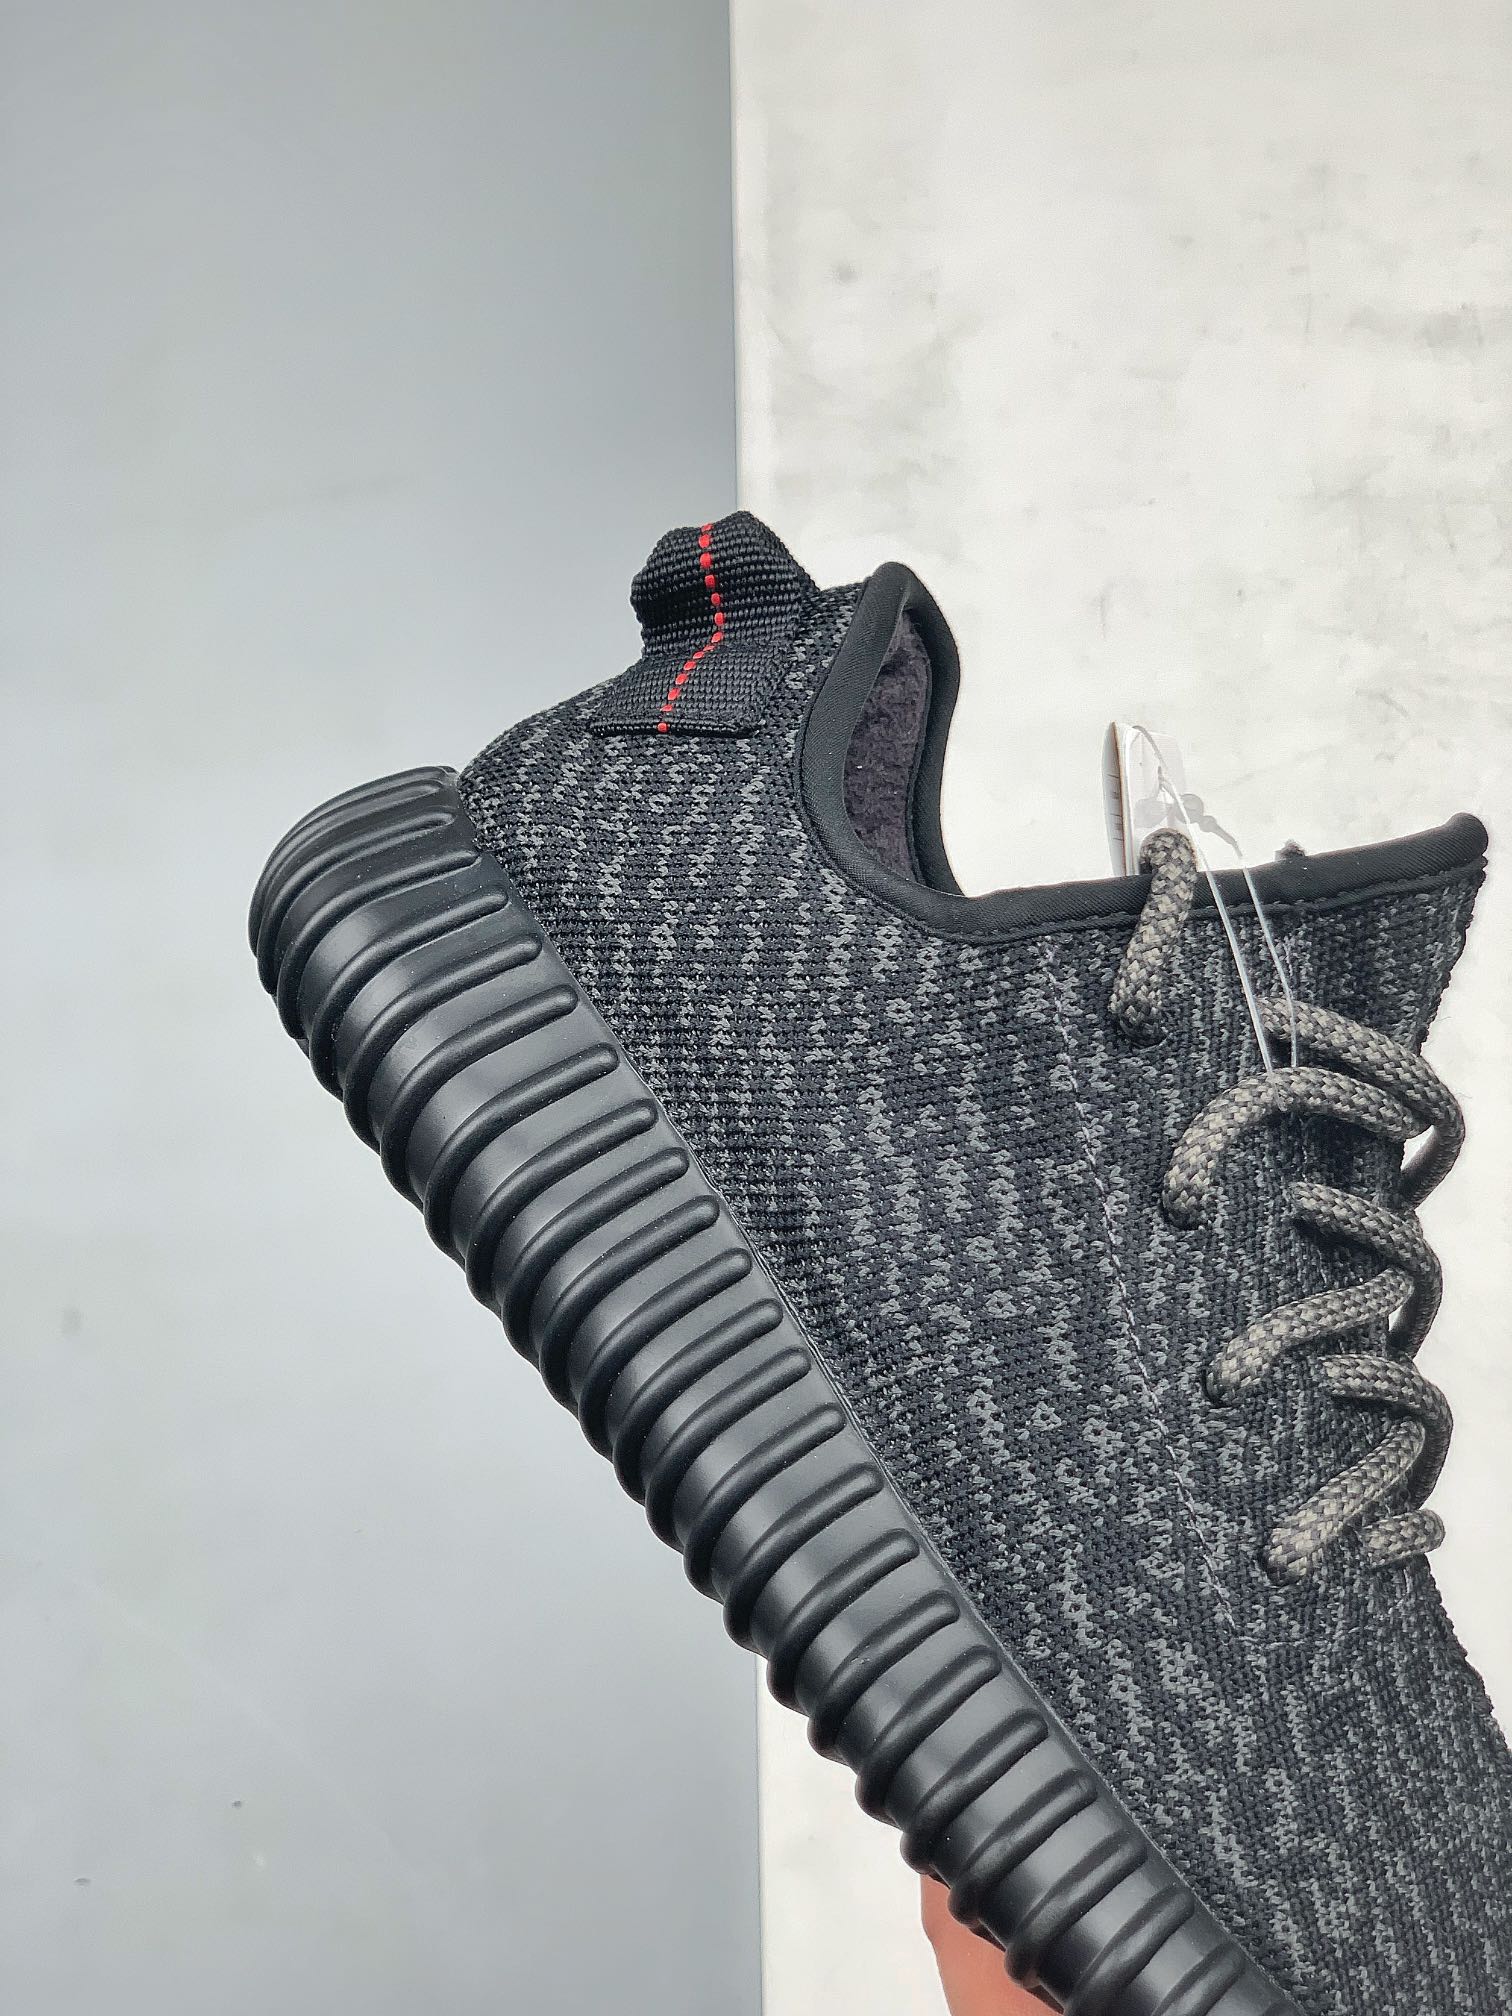 Adidas Yeezy Boost 350 Pirate Black BB5350 - Stylish and Comfortable Footwear